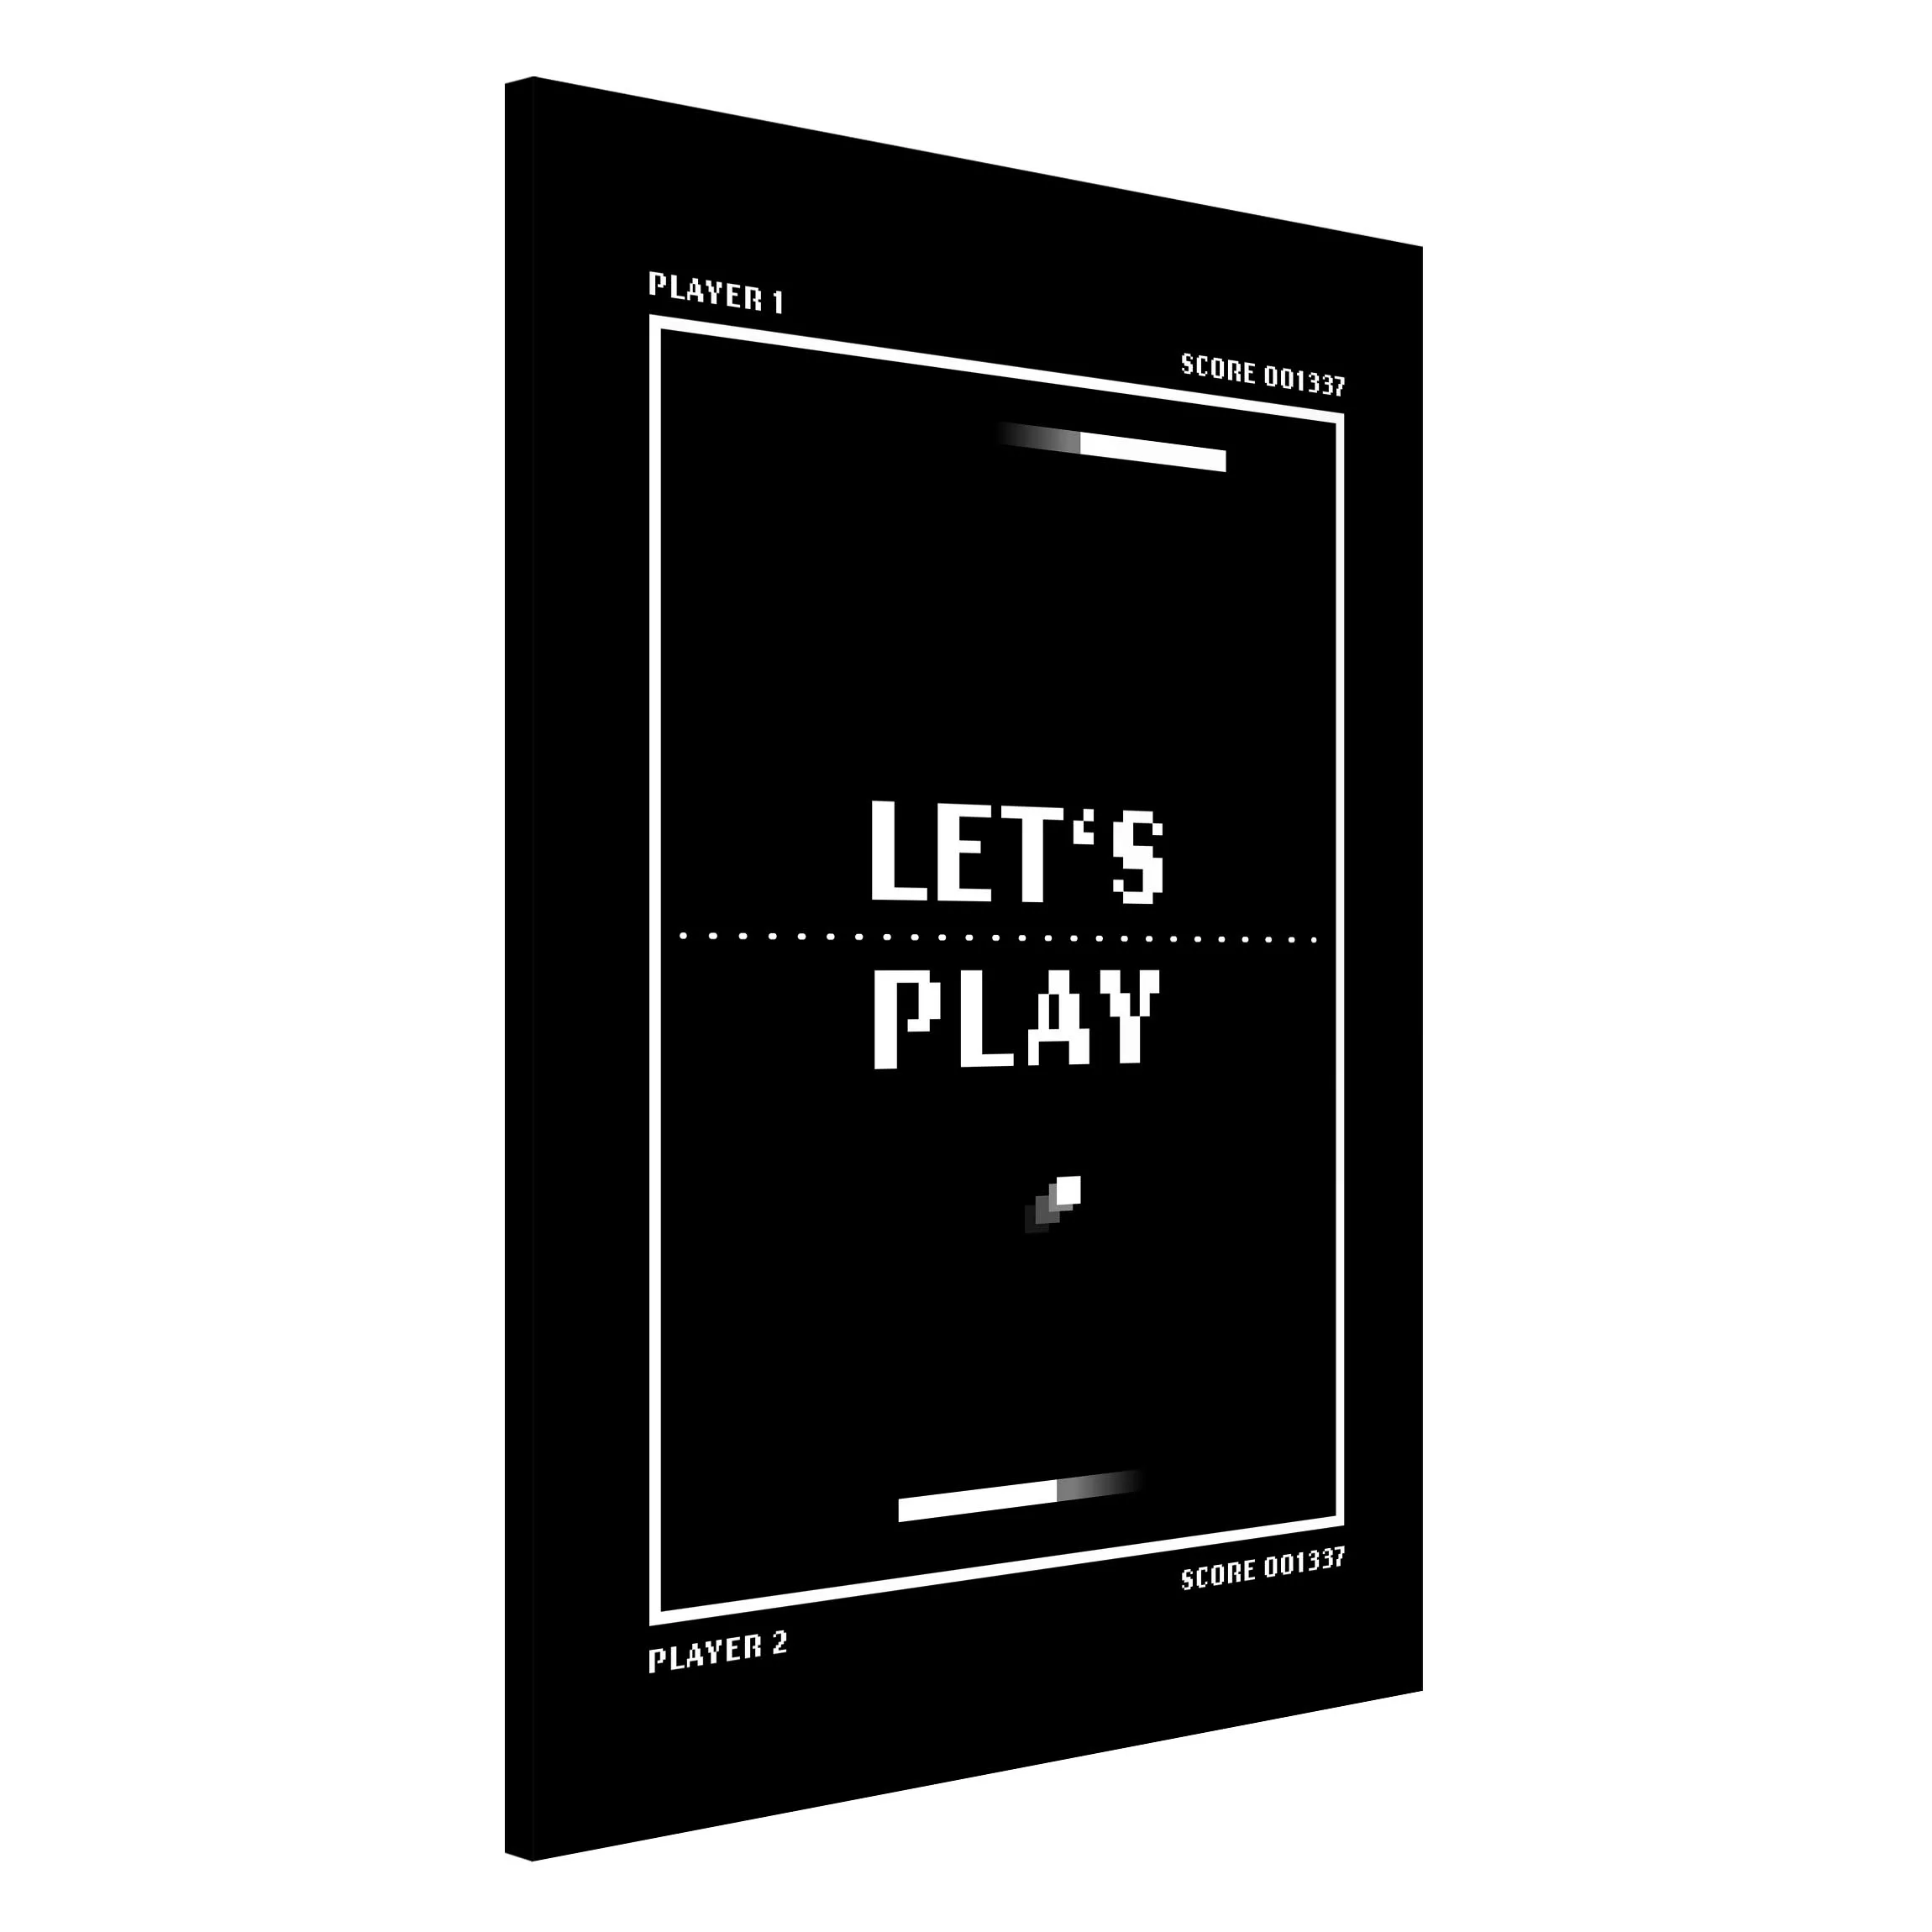 Magnettafel Classical Video Game In Black And White Let's Play günstig online kaufen